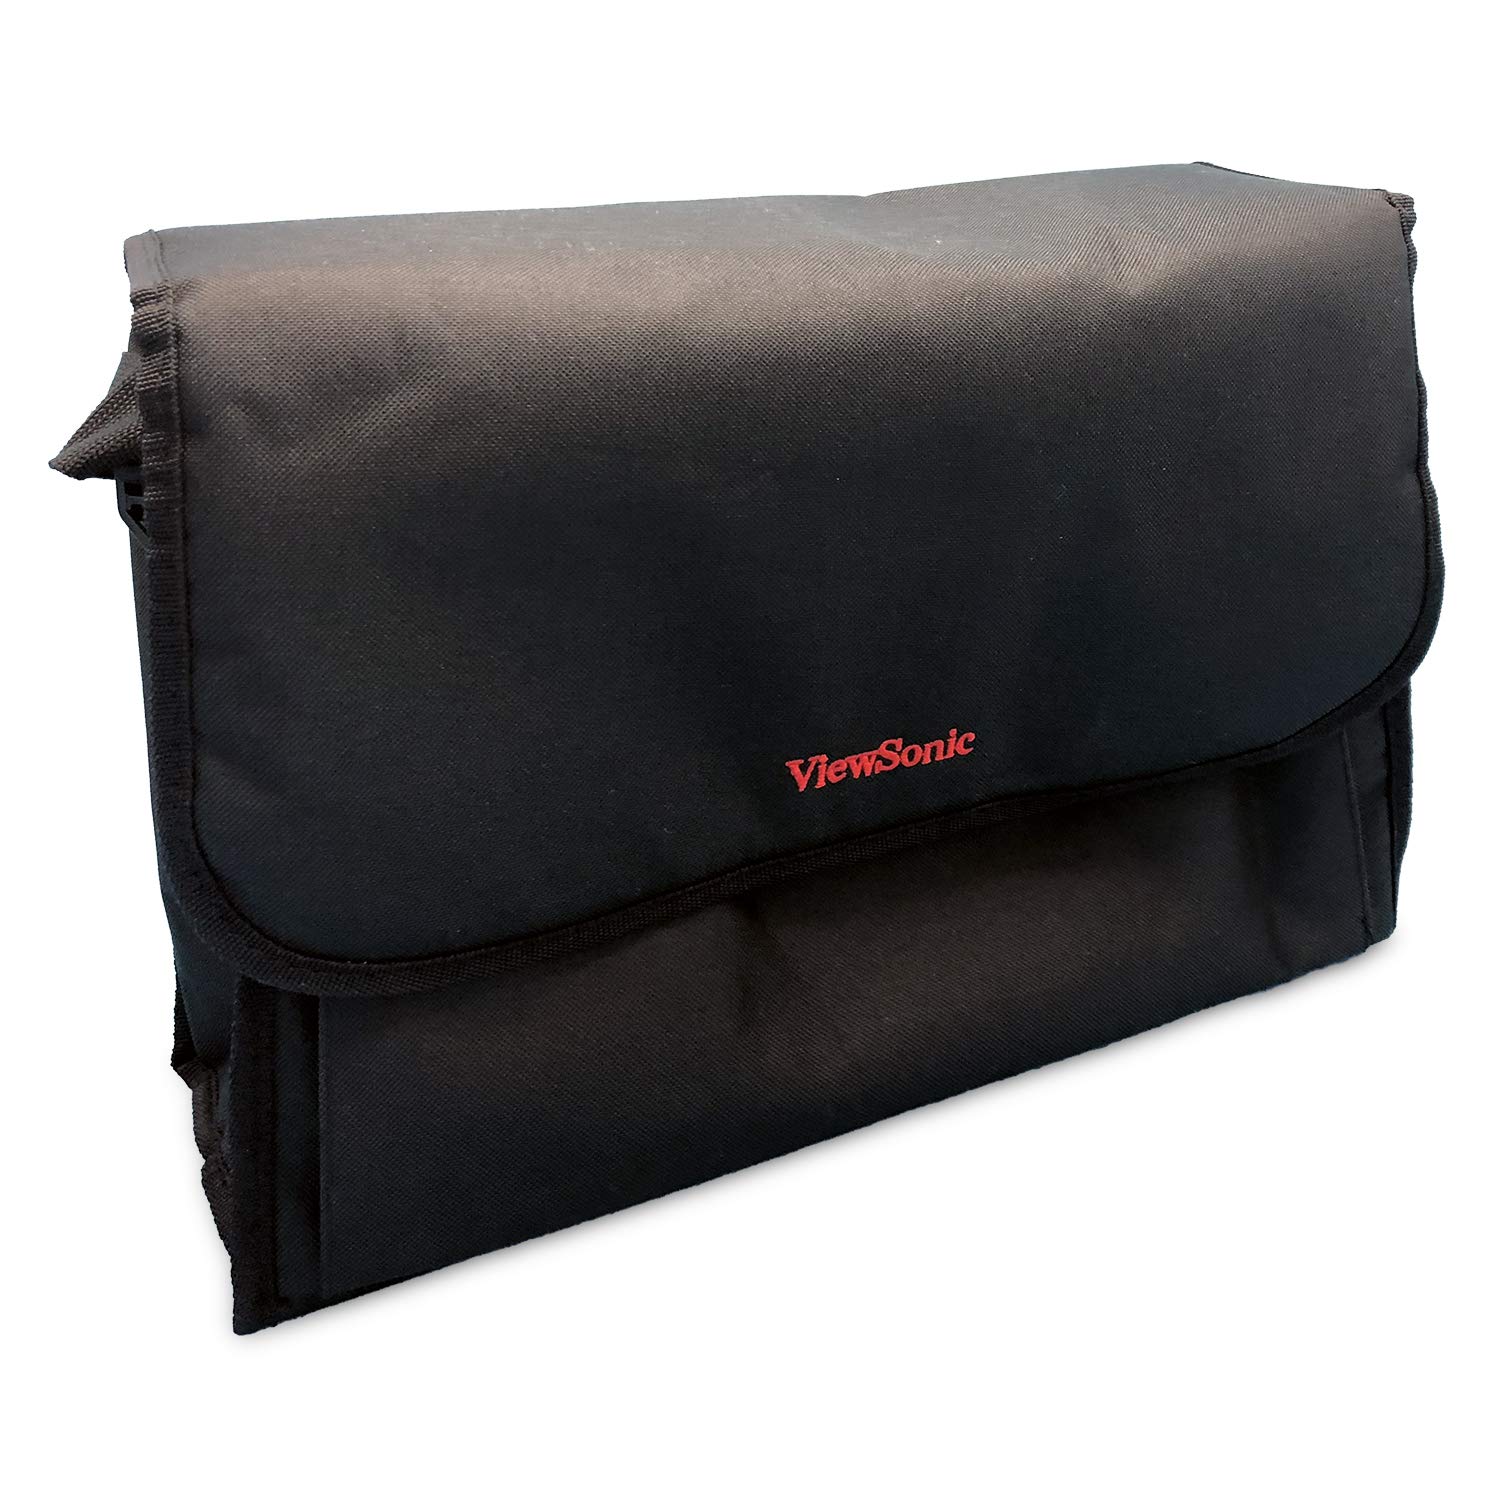 ViewSonic PJ-CASE-011 Zipped Soft Padded Carrying Case for ViewSonic Projectors Large